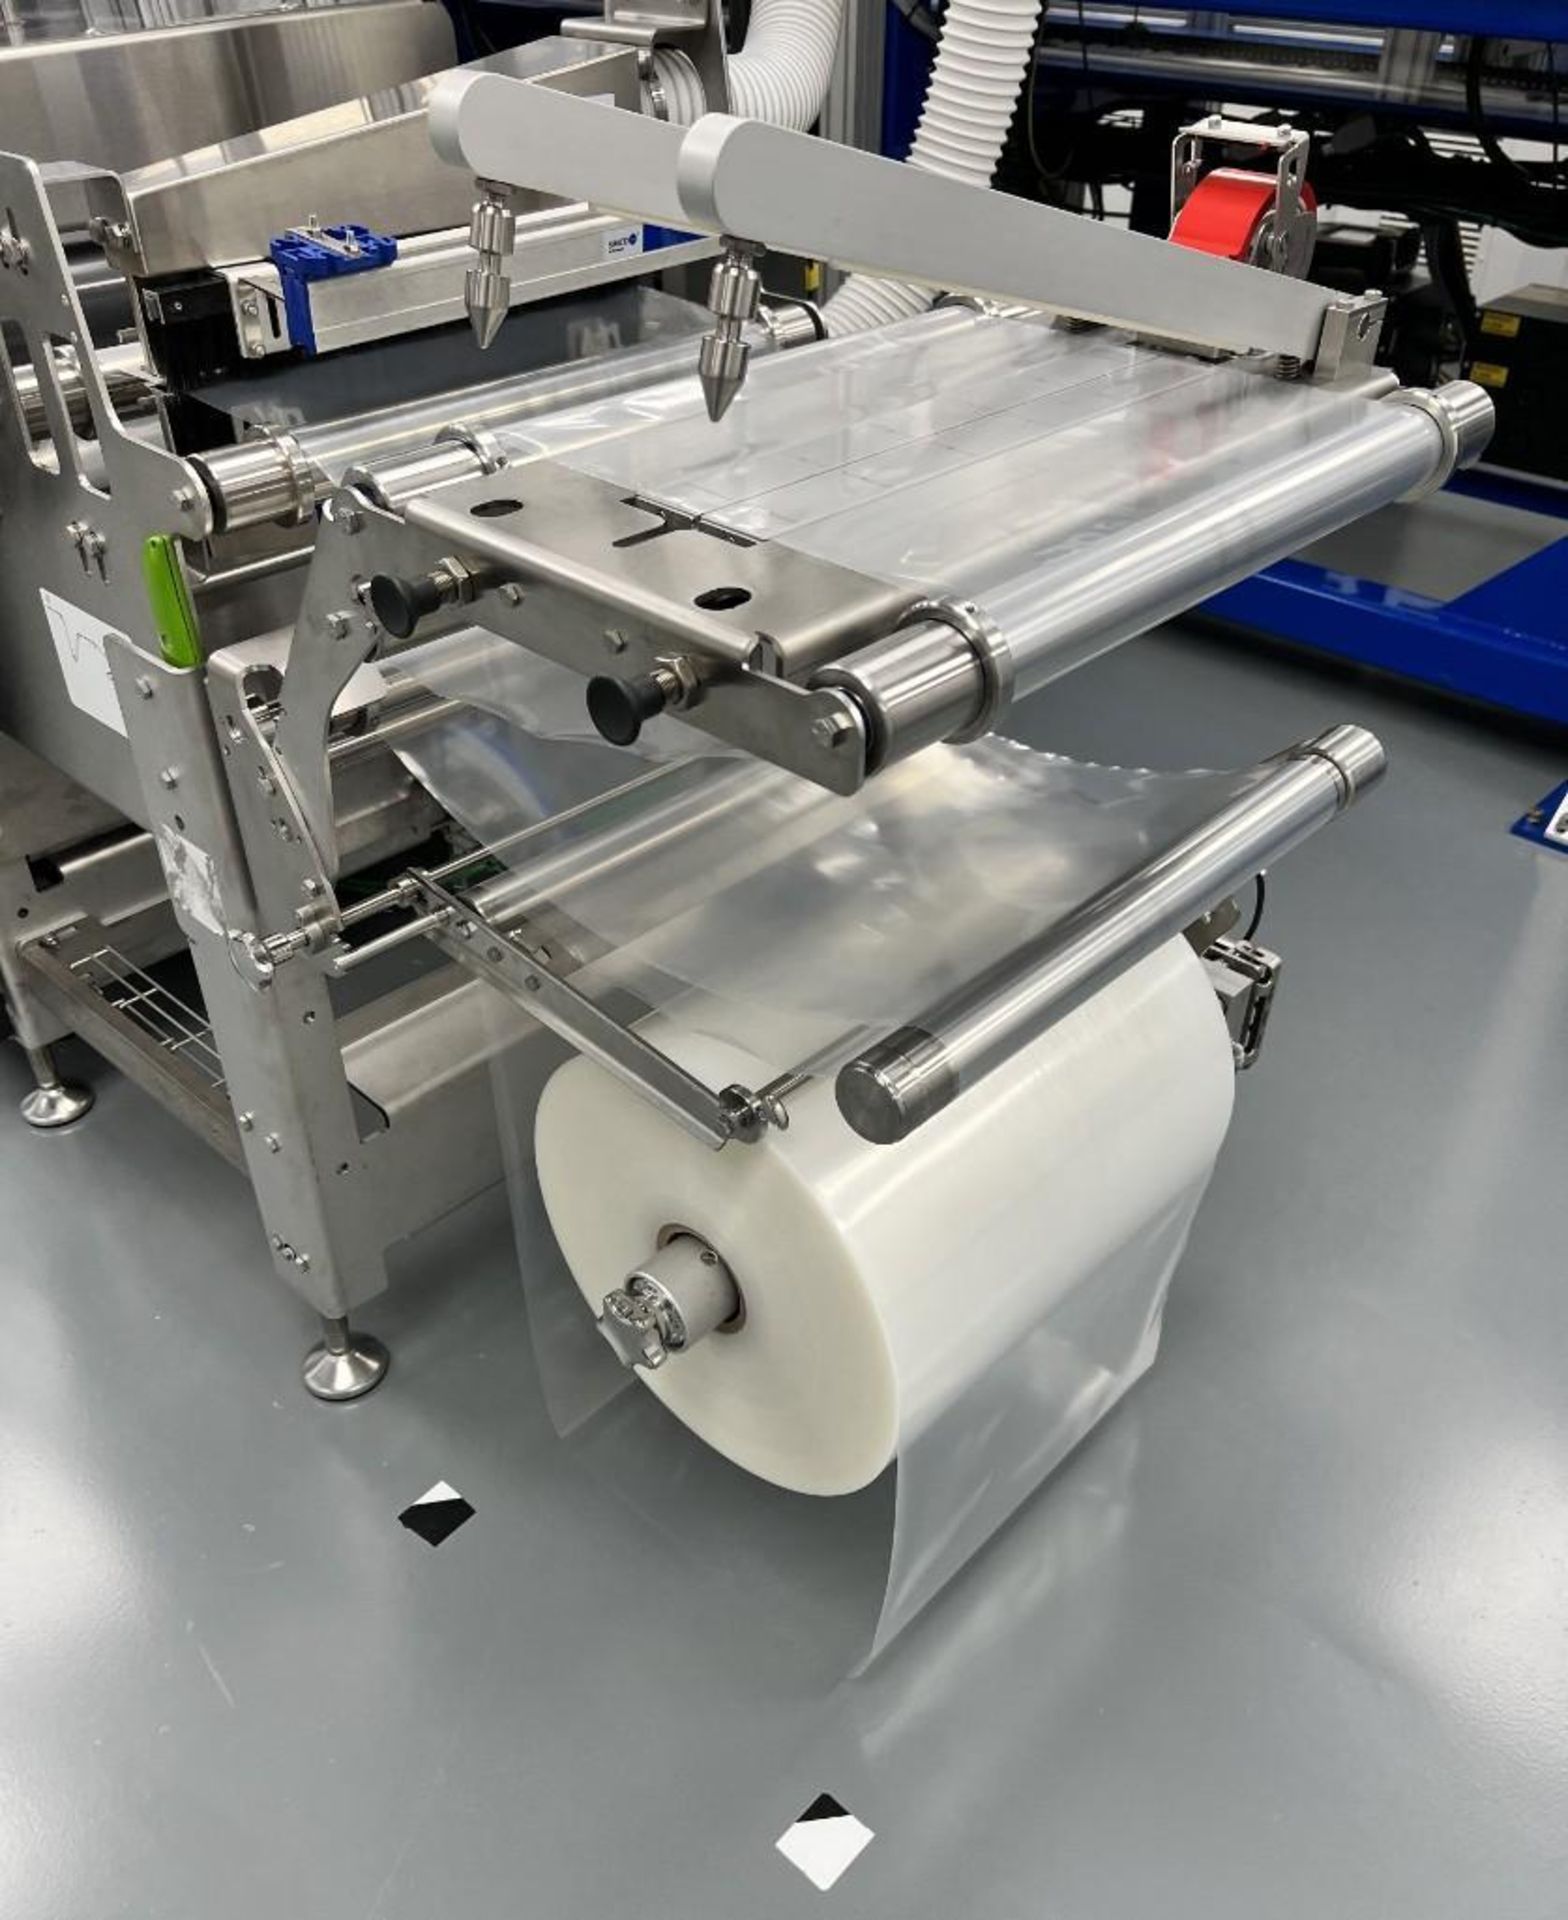 Multivac Fully Automatic Stainless Steel Horizontal Form, Fill, And Seal Rollstock Packaging Machine - Image 3 of 91